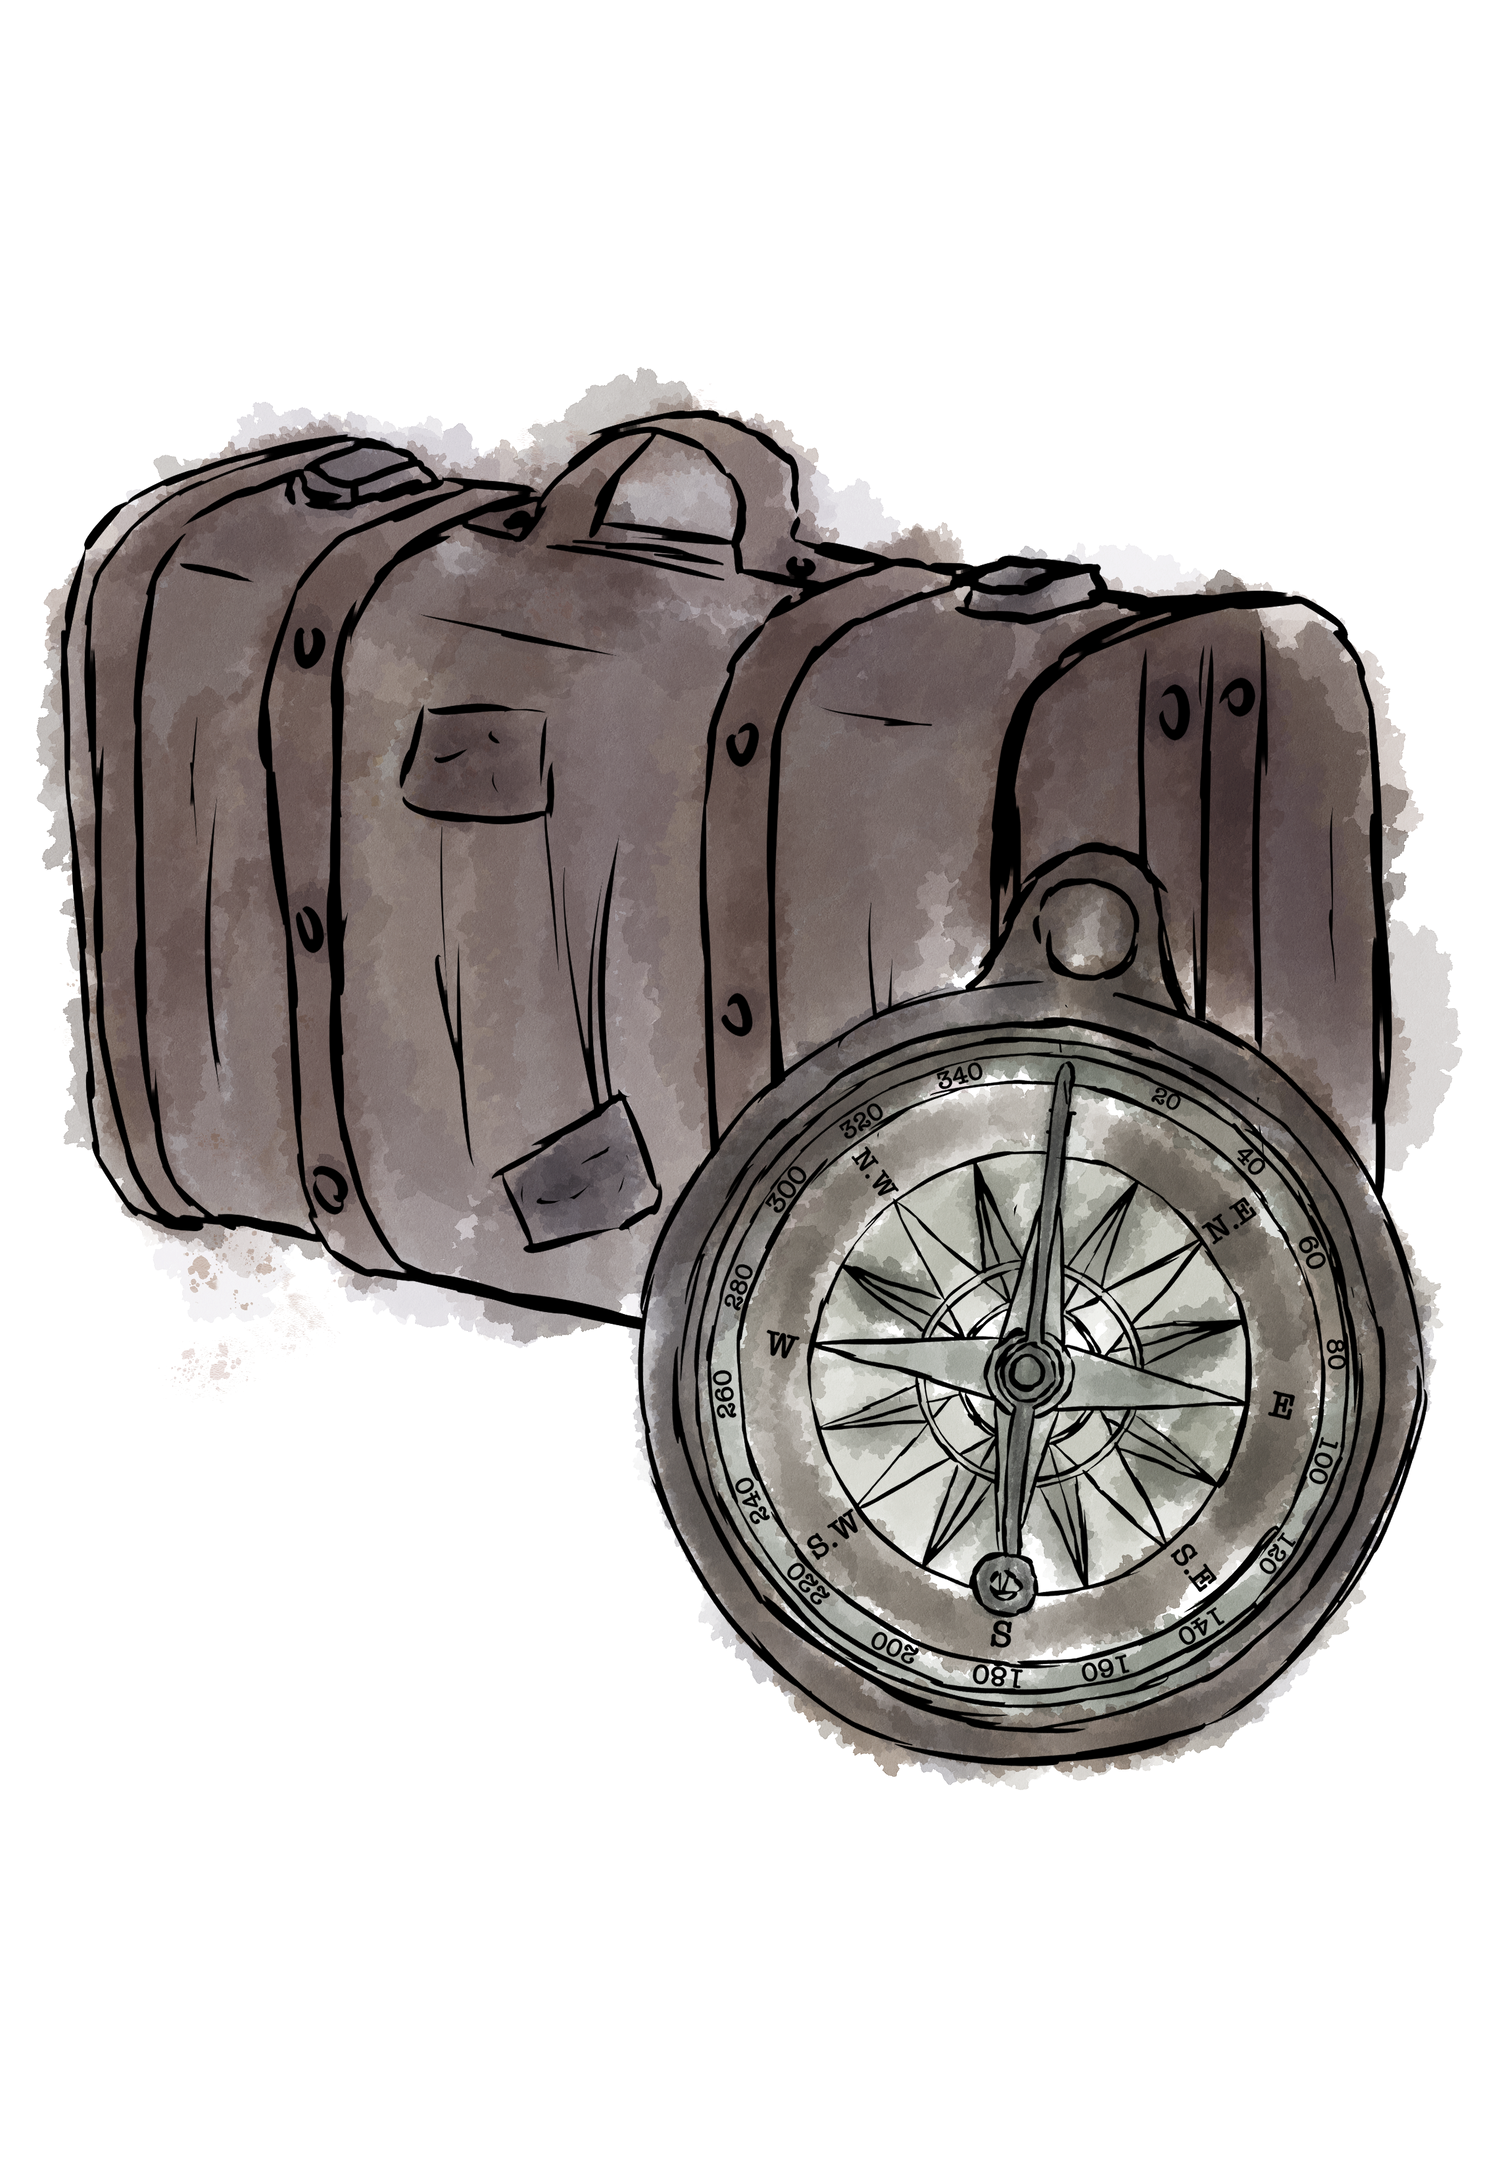 Digital watercolor of an old-fashioned suitcase and compass.